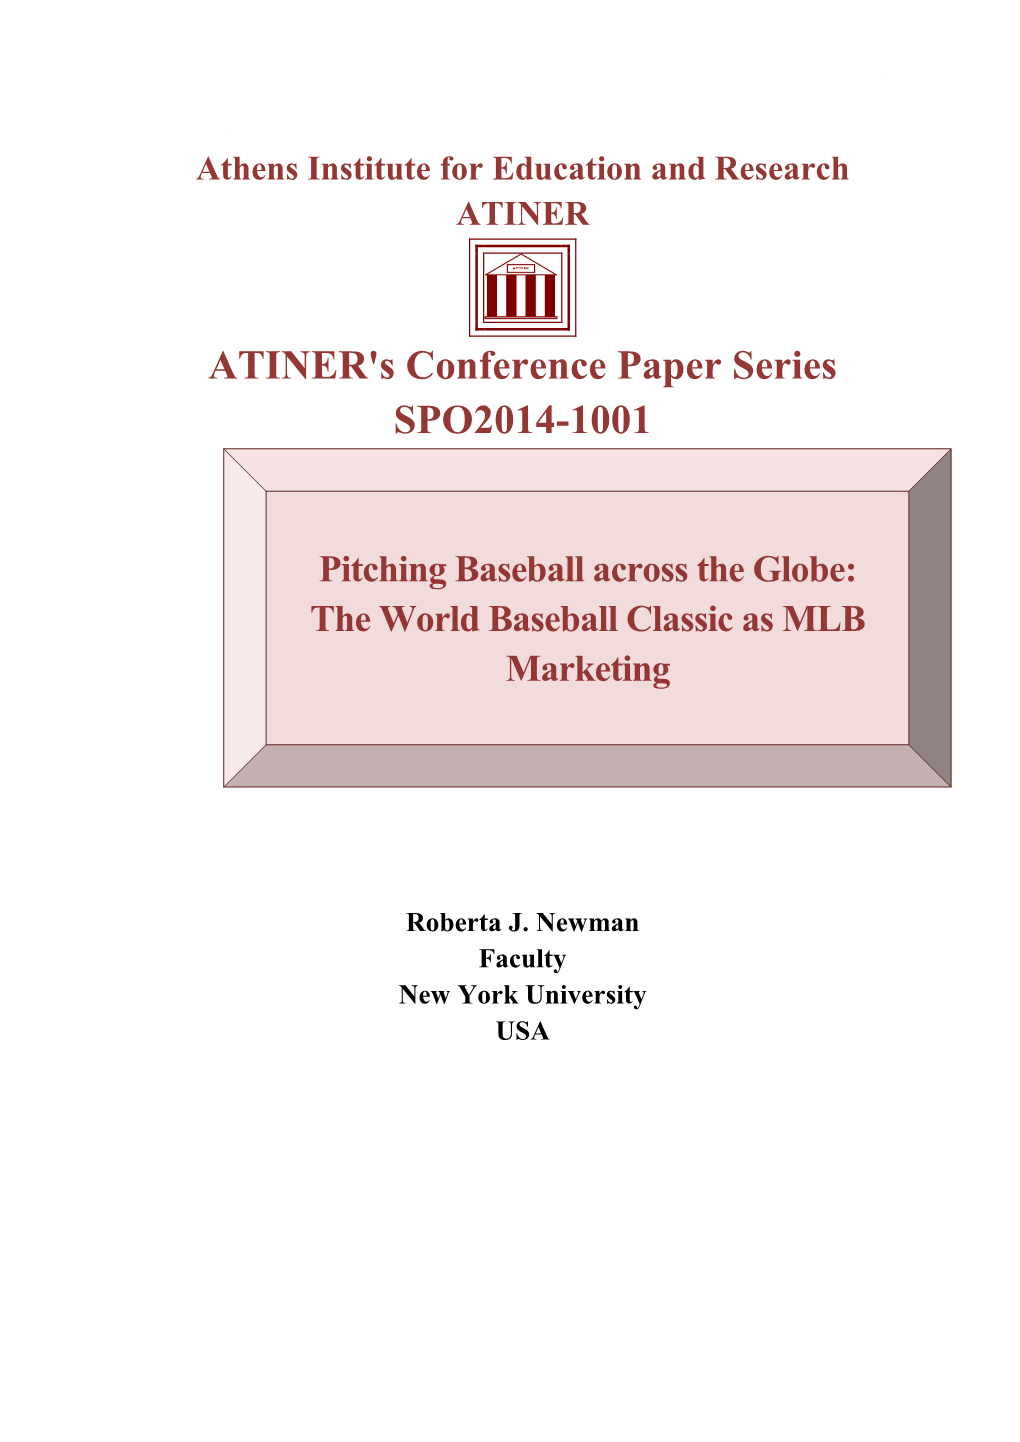 ATINER's Conference Paper Series SPO2014-1001